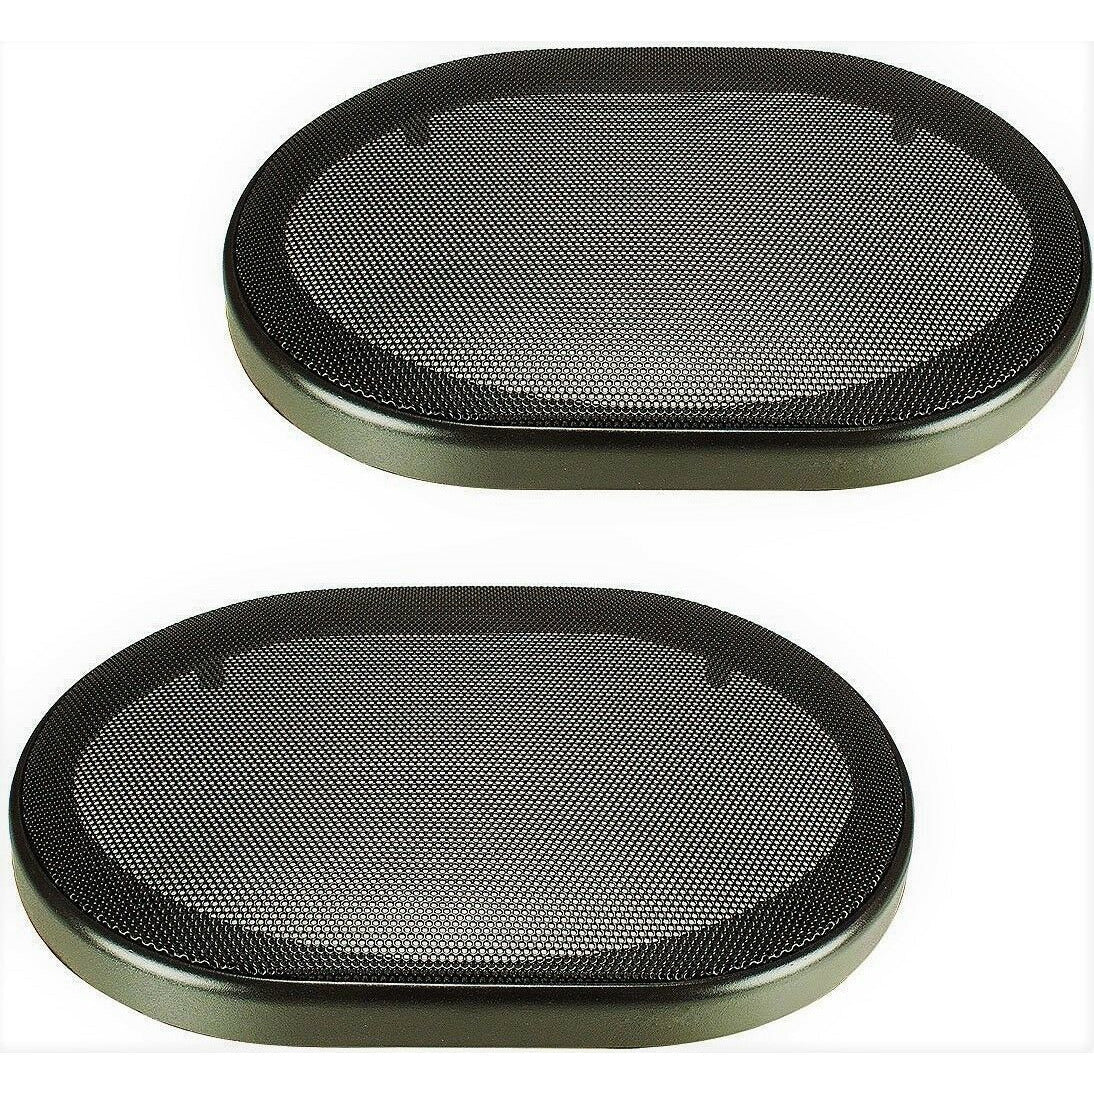 2 Universal 6"x9" Speaker COAXIAL Component Protective Grills Covers